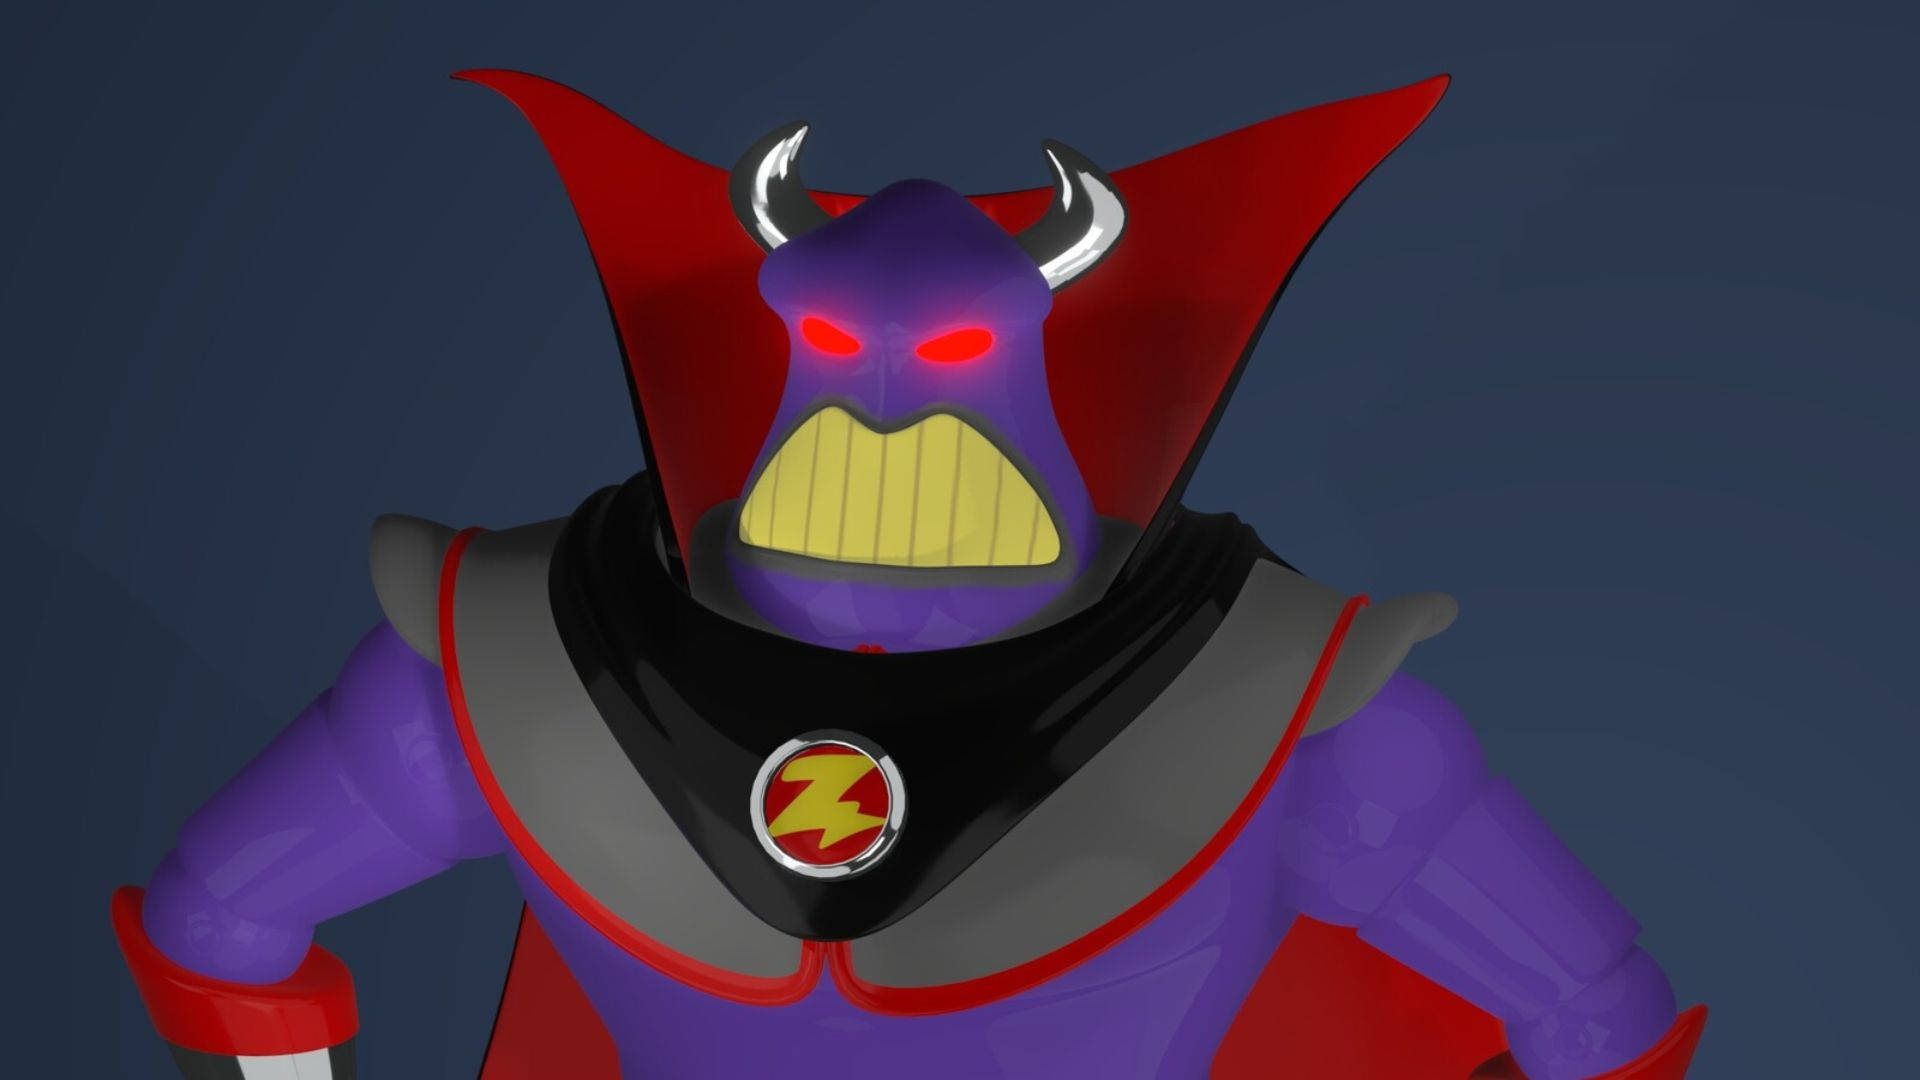 Emperor Zurg Angry Face Wallpaper